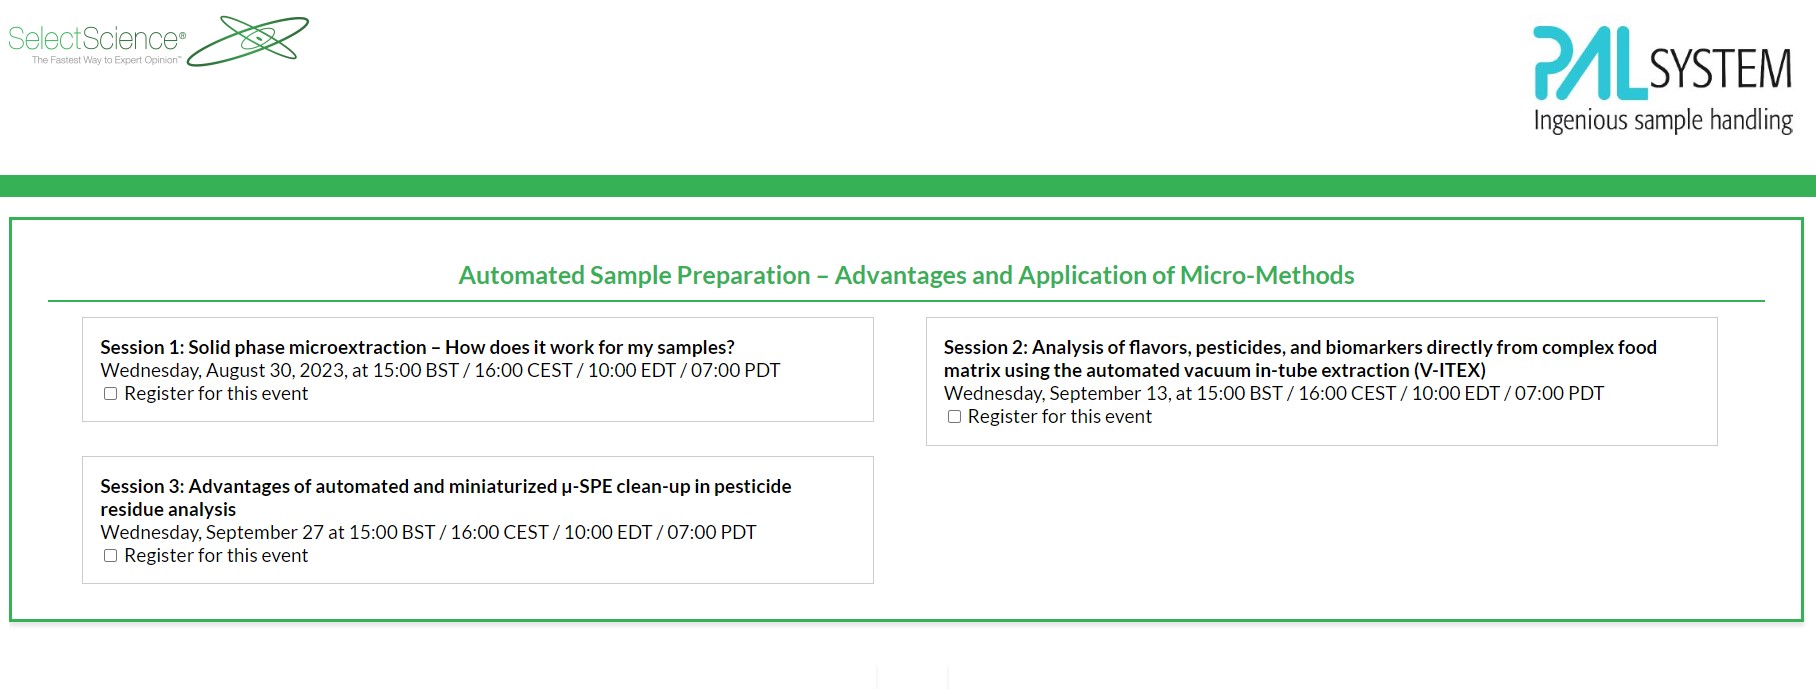 SelectScience: Solid phase microextraction – How does it work for my samples?